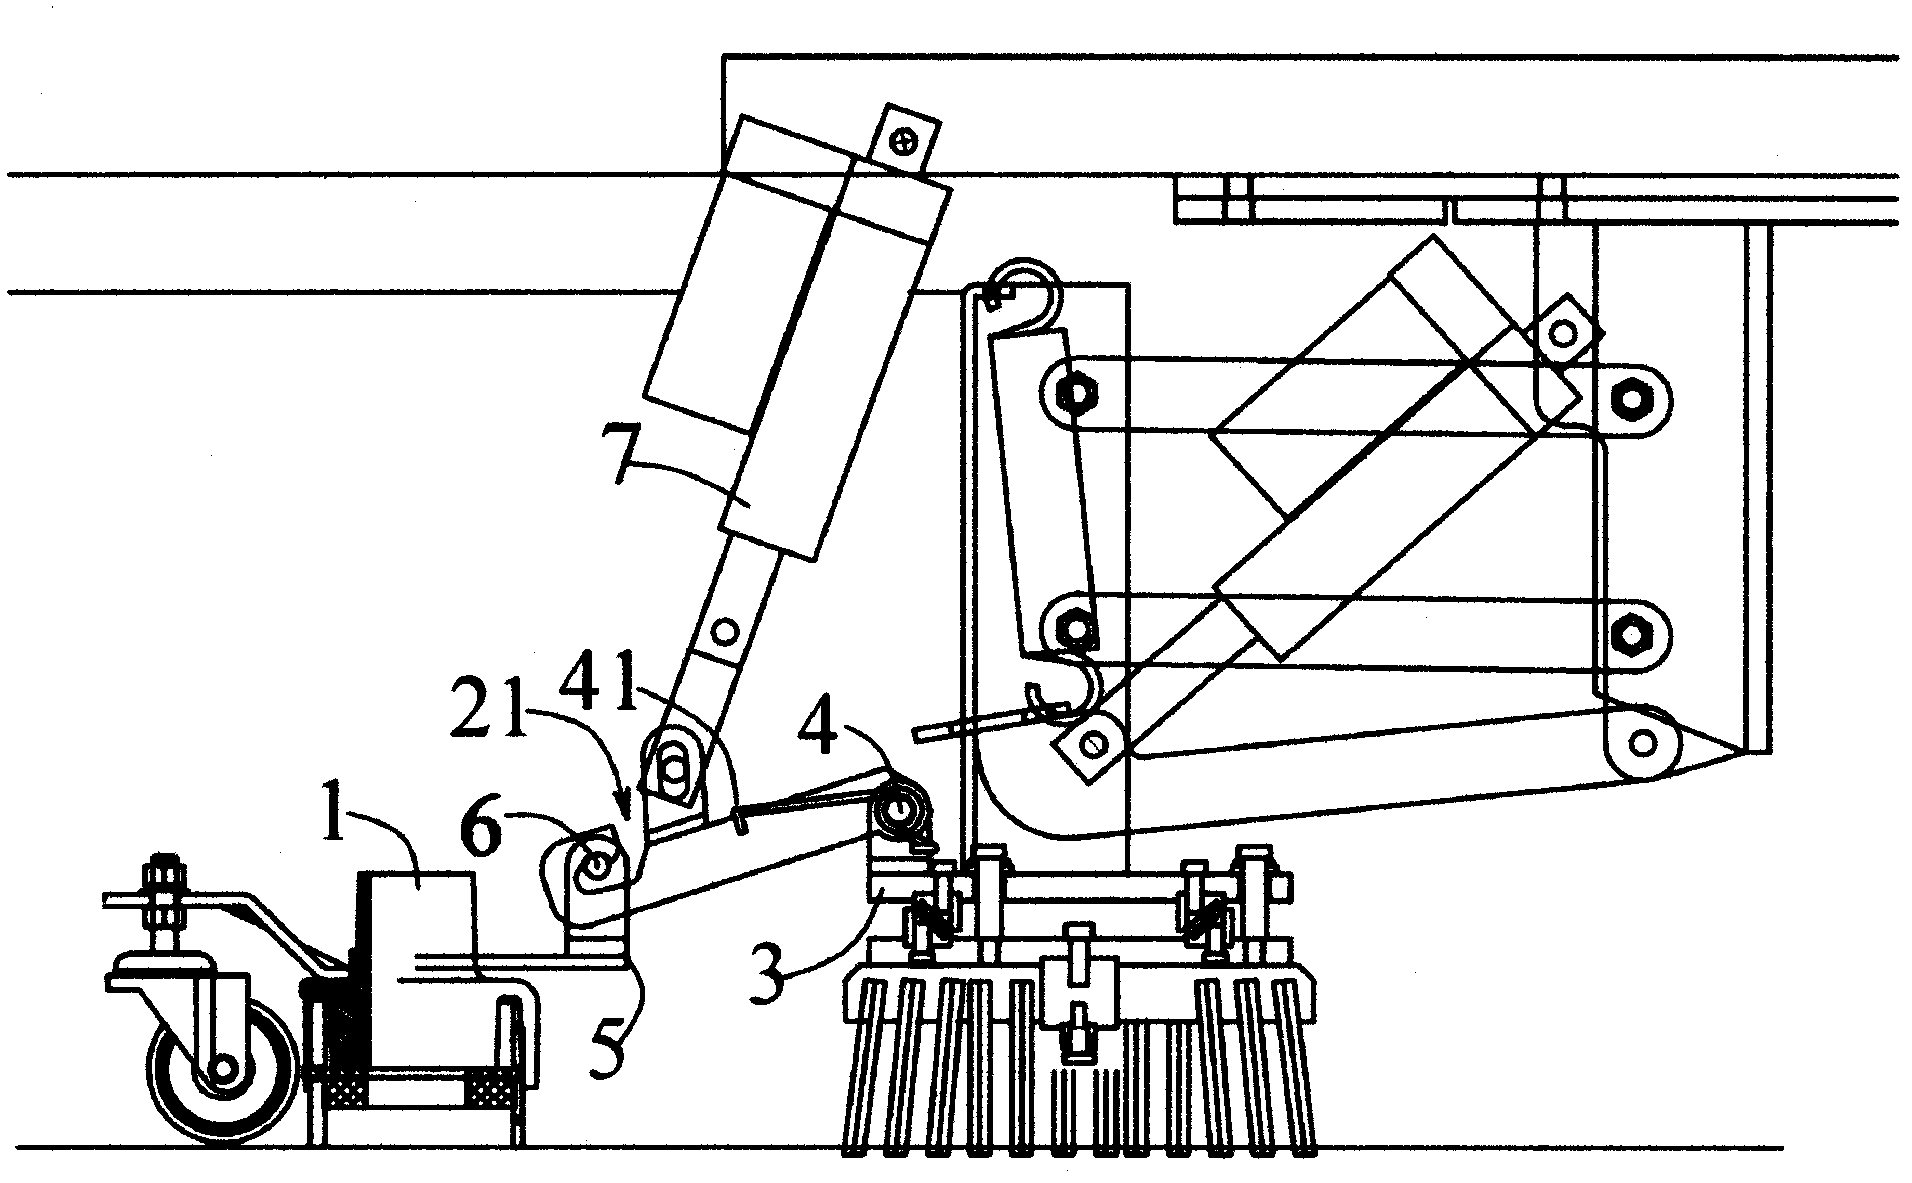 Force applying device used for ground washing vehicle wiper on ground